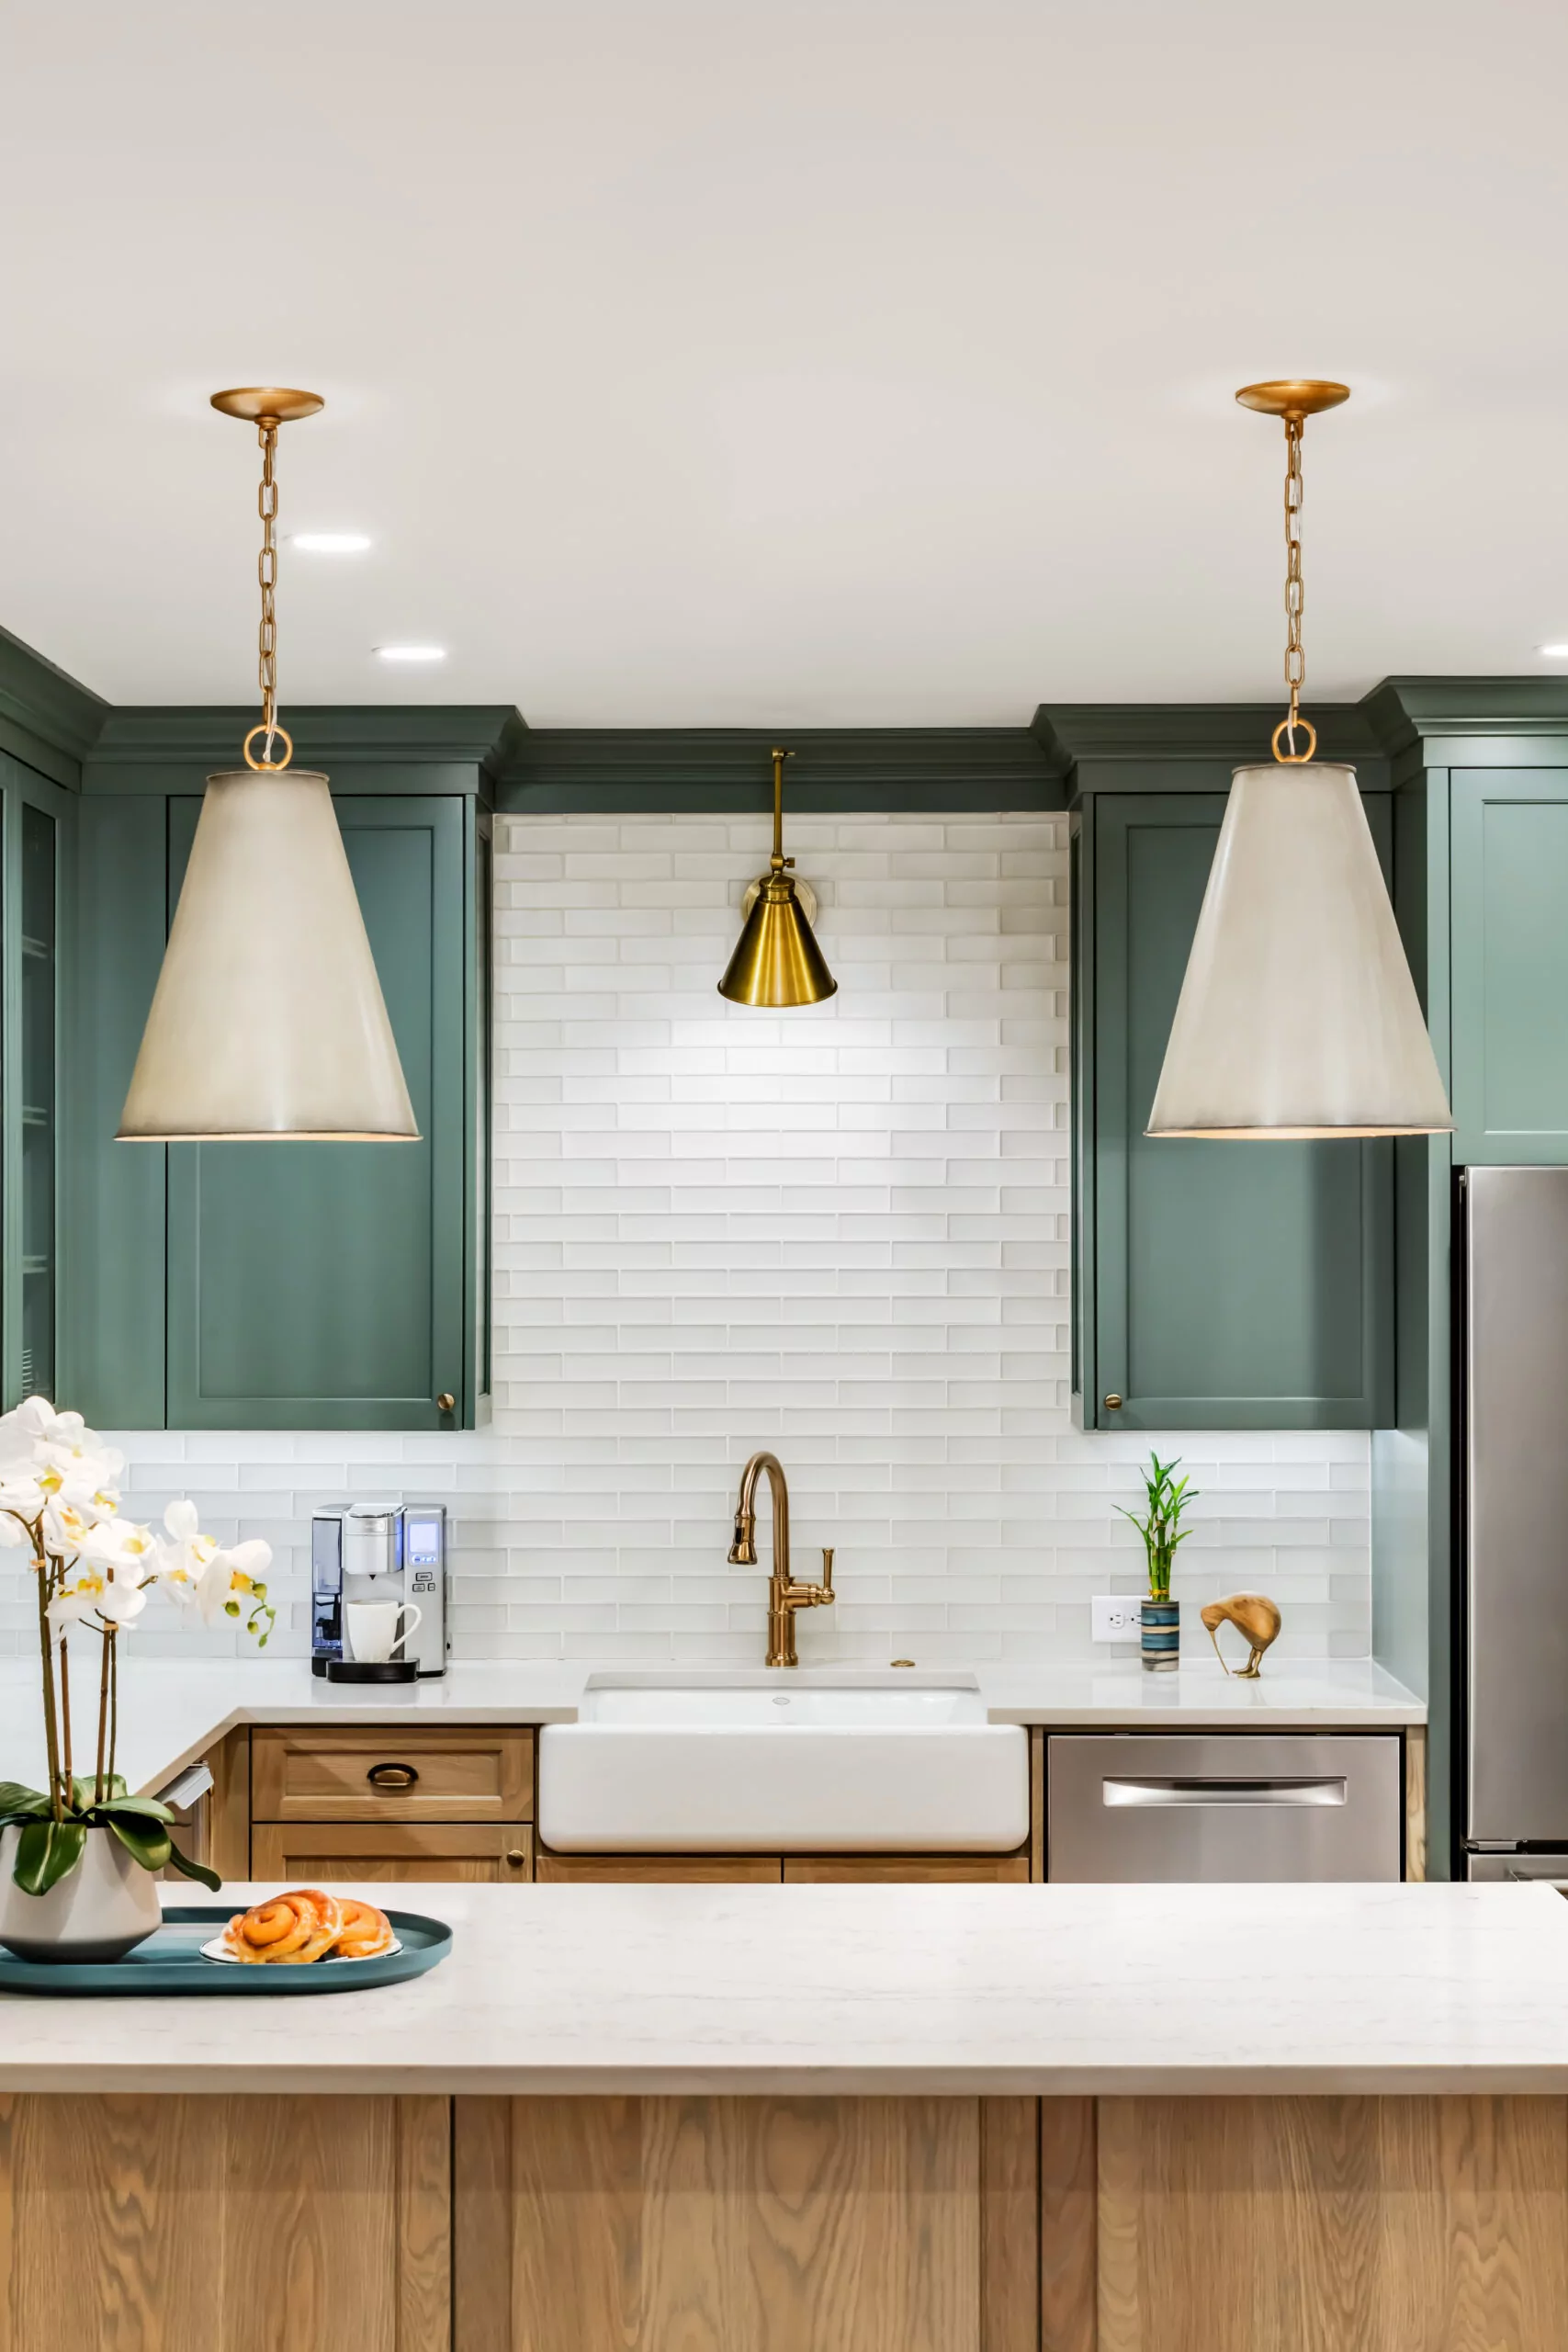 A kitchen design displaying vibrant green cabinets complemented by pristine white counter tops.